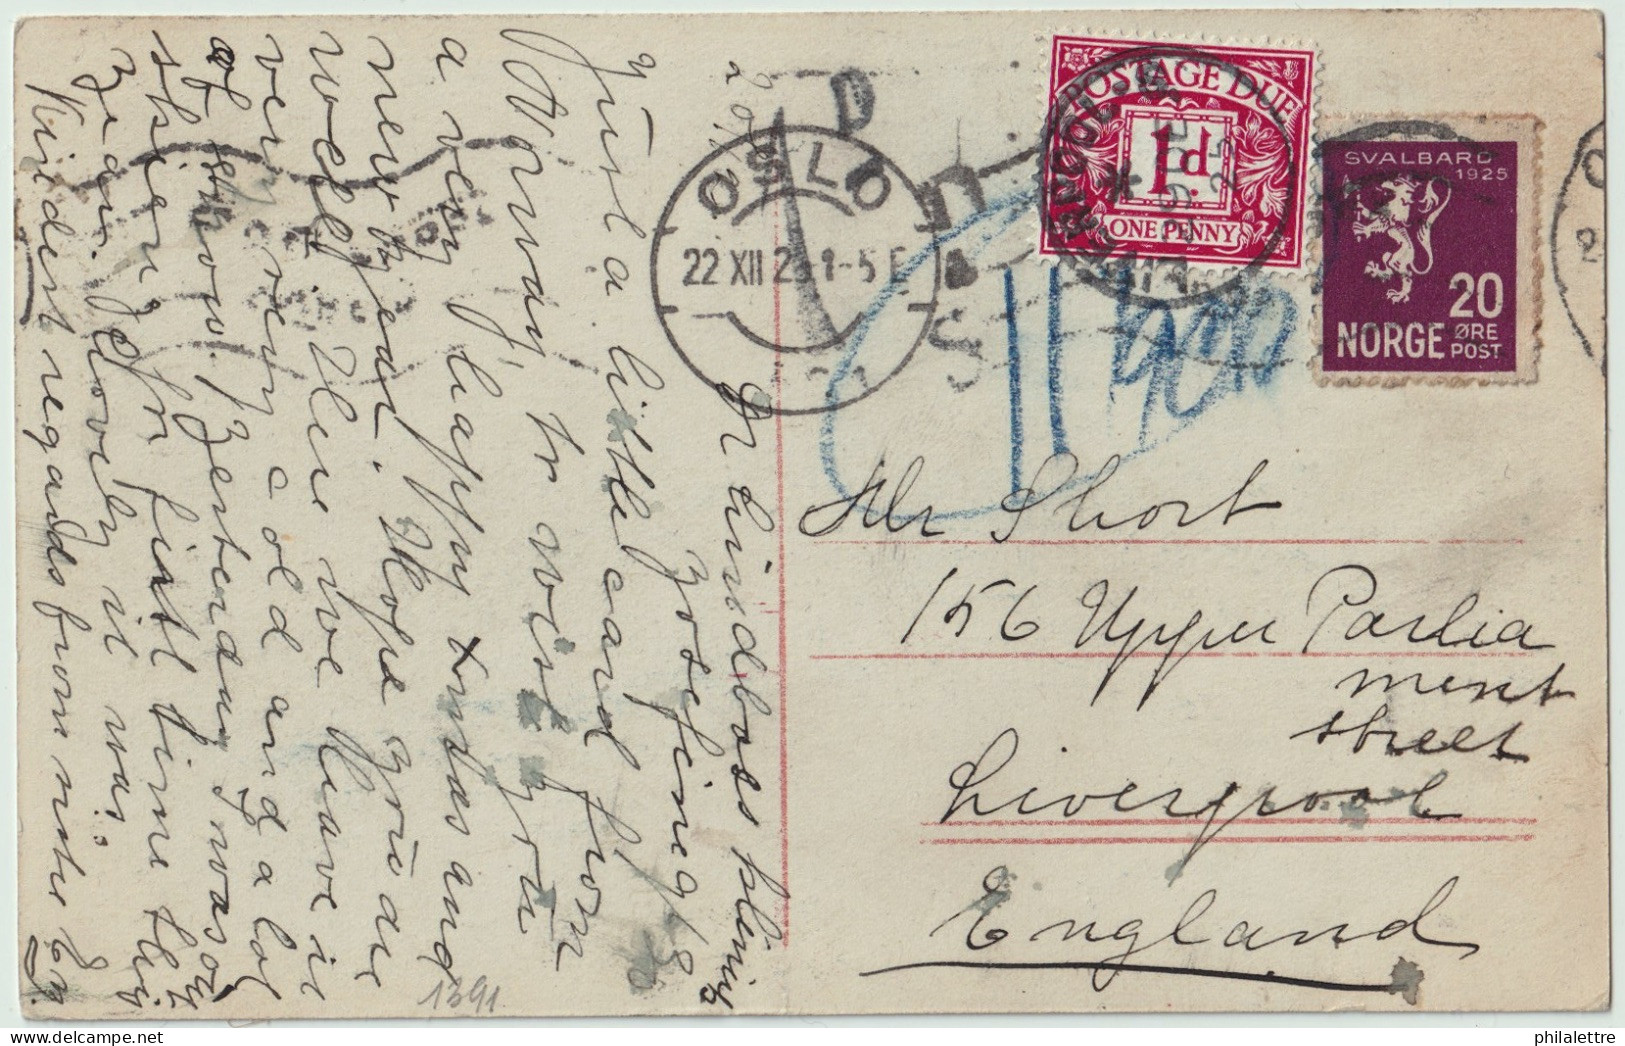 ROYAUME-UNI / UK - SG D11 On 1925 DENMARK To GB Underpaid Postage Due OSLO PPC To LIVERPOOL Franked 20 ör SVALBARD Issue - Impuestos